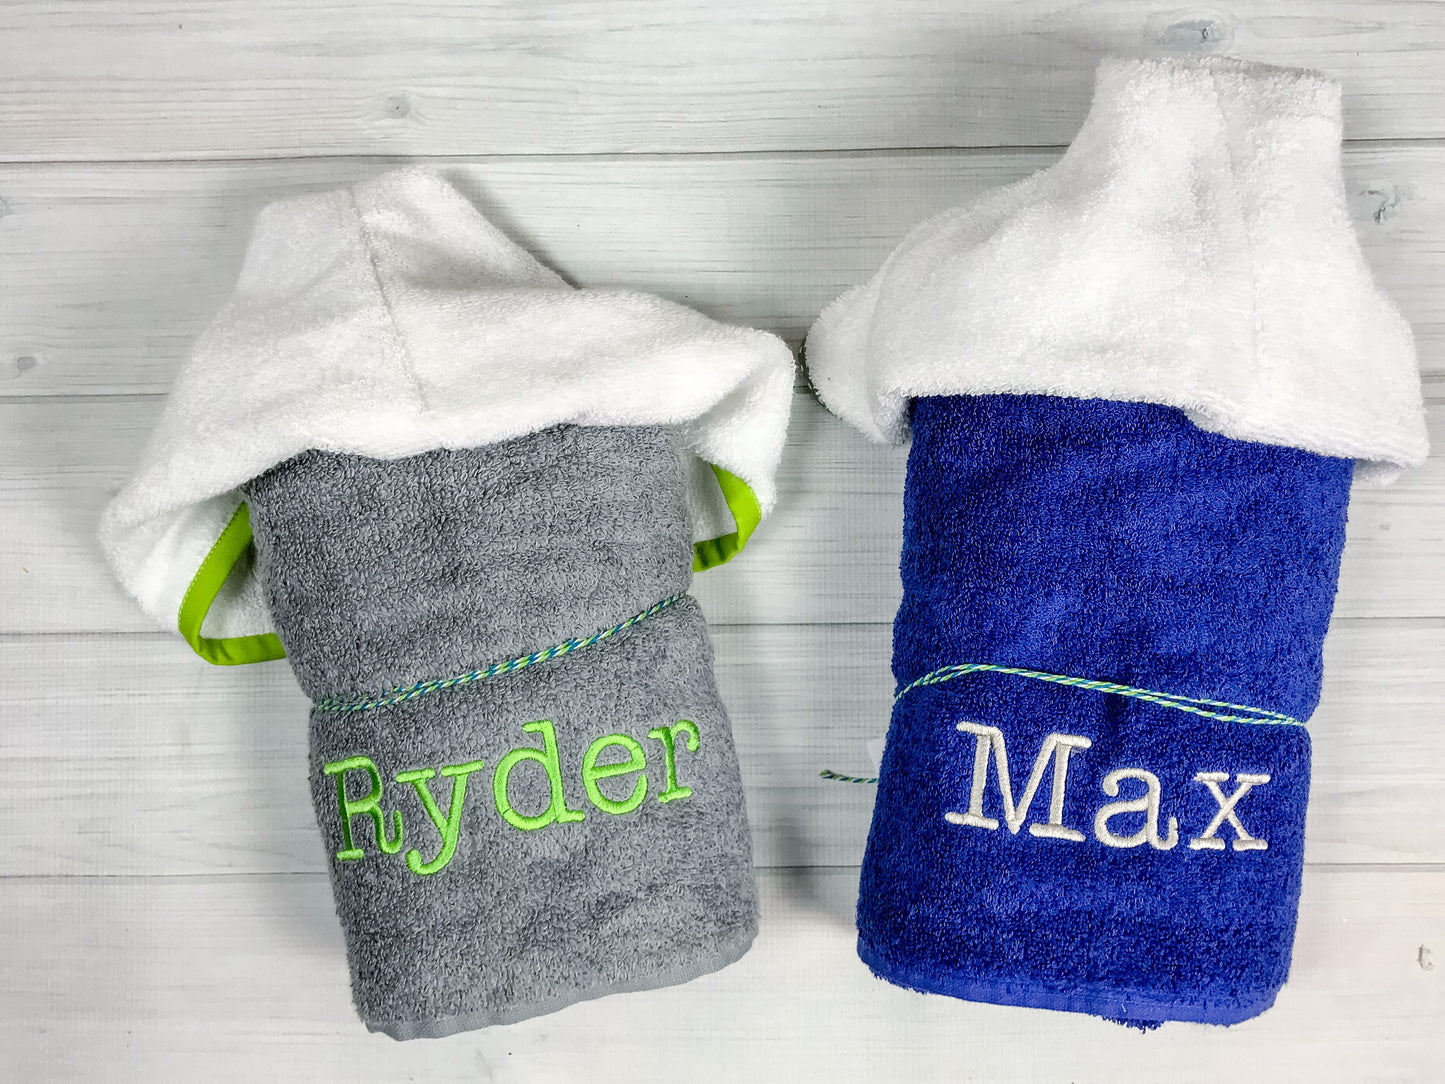 Hooded Towel | Holiday Gnome 2